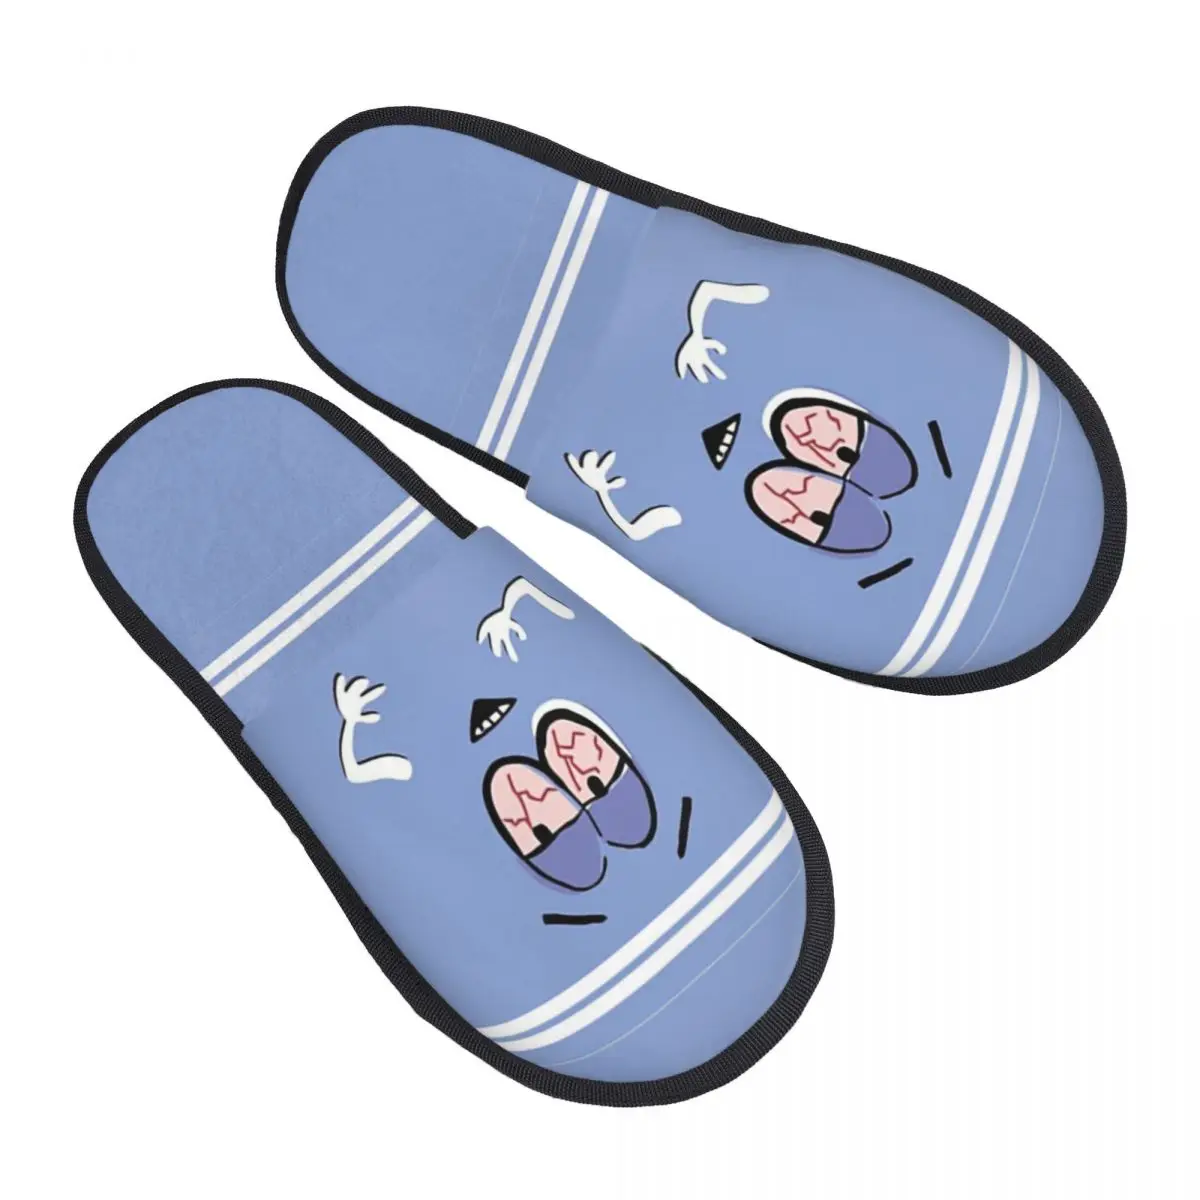 

Winter Furry Slippers SouthPark Towelie Accessories Household Fur Slippers Slides Indoor Cozy Non-slip Slides